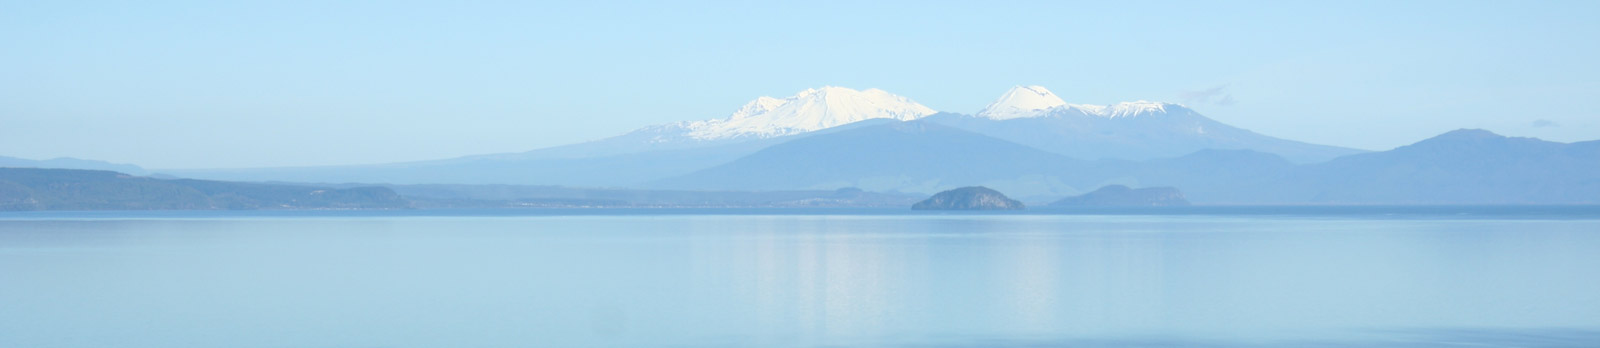 Looking over Lake Taupo in New Zealand